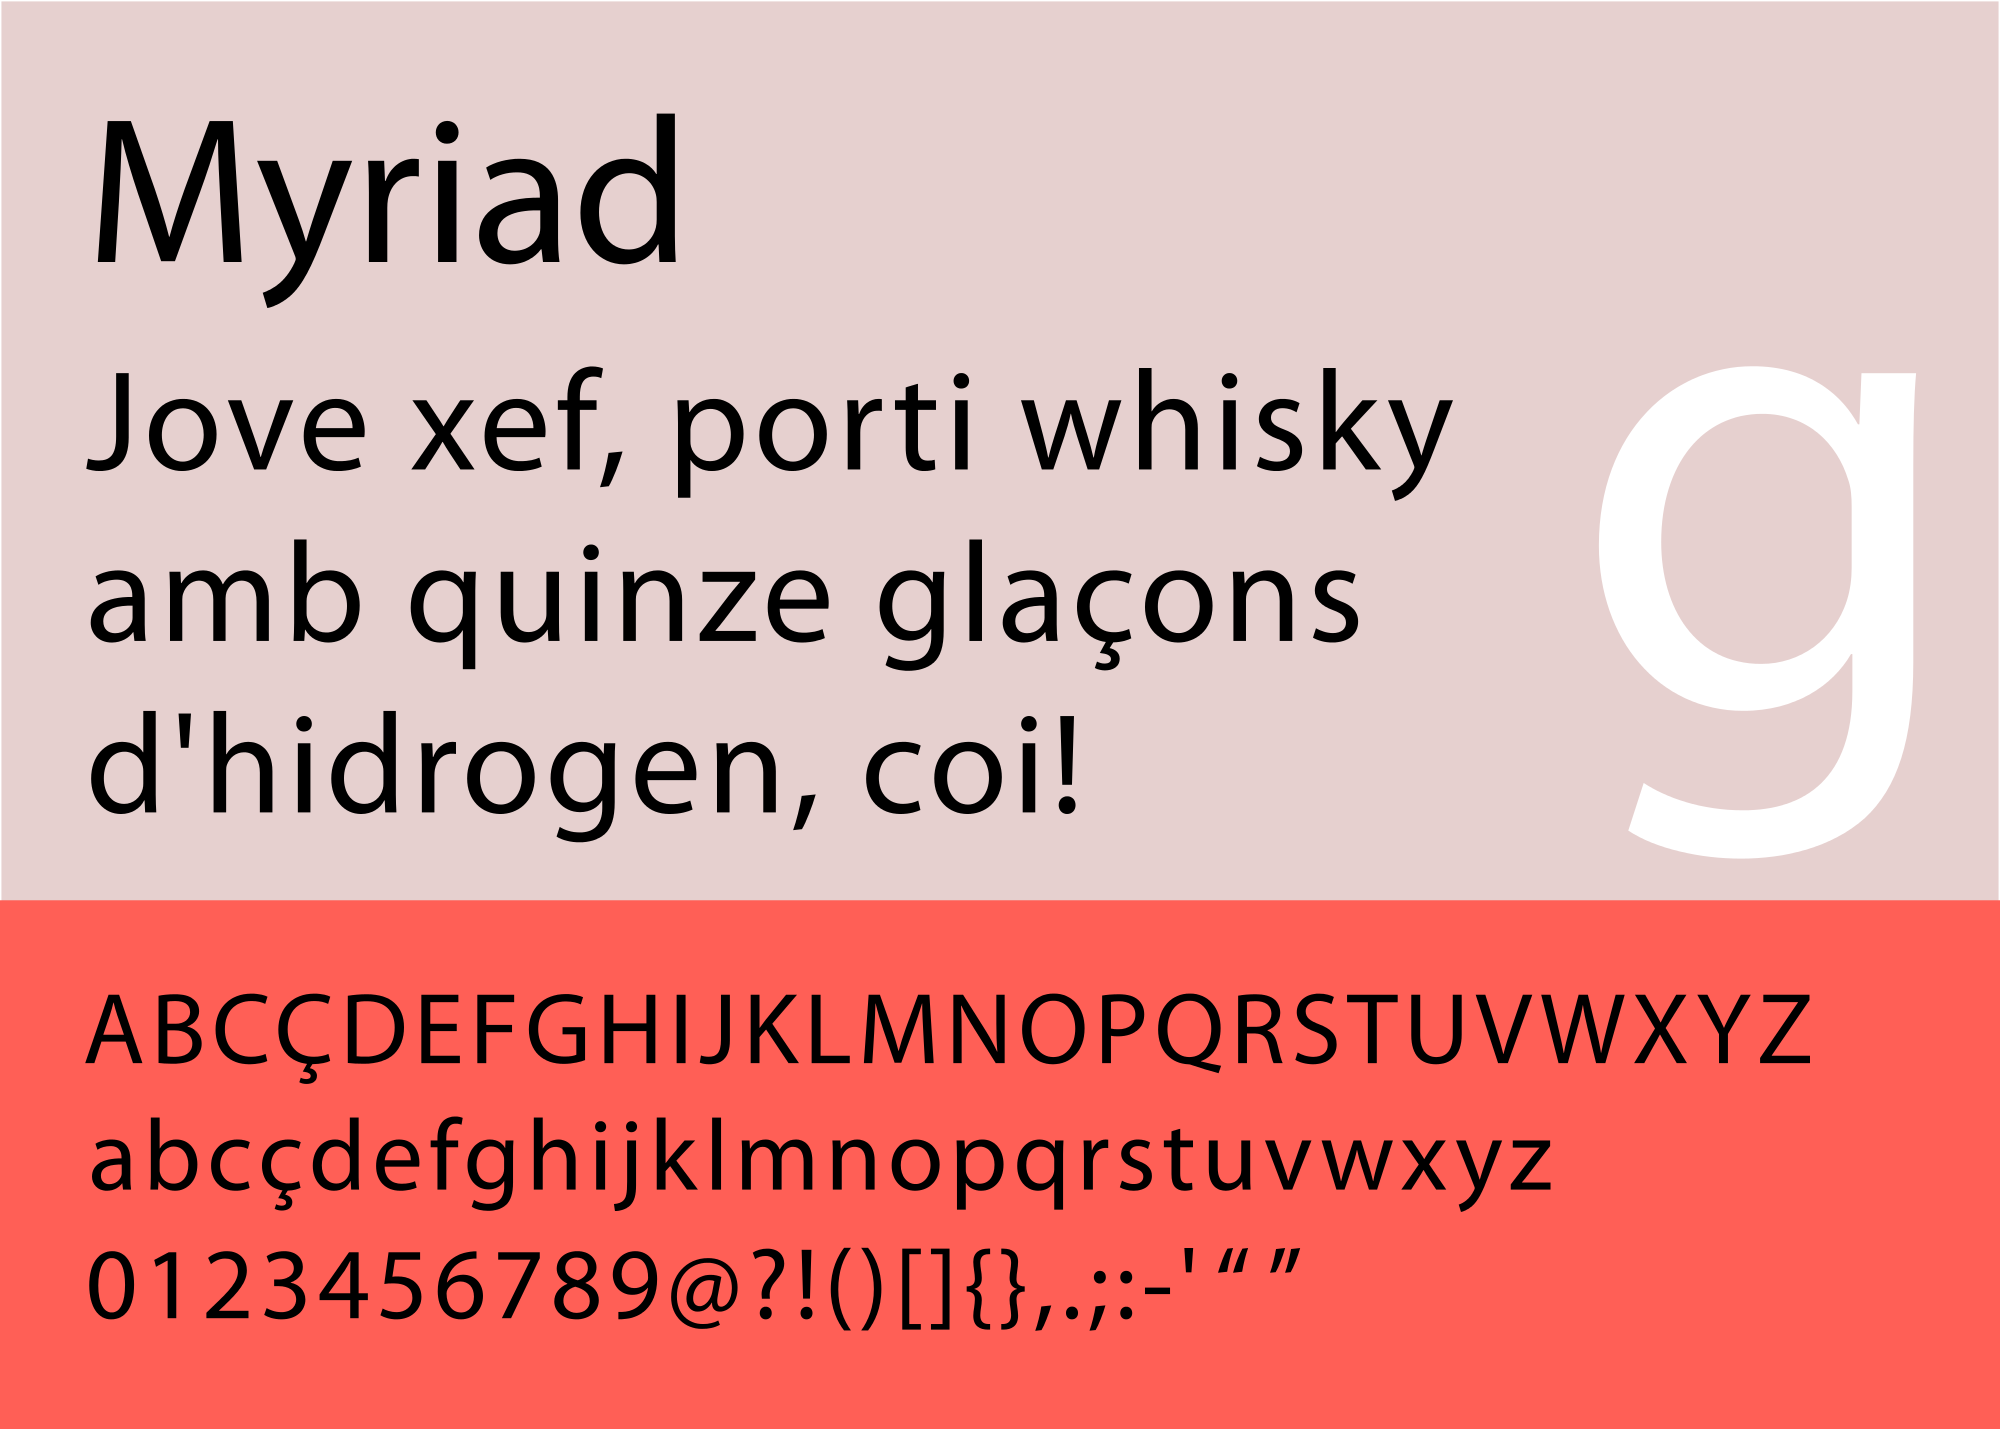 25 most used typefaces in advertising: Myriad